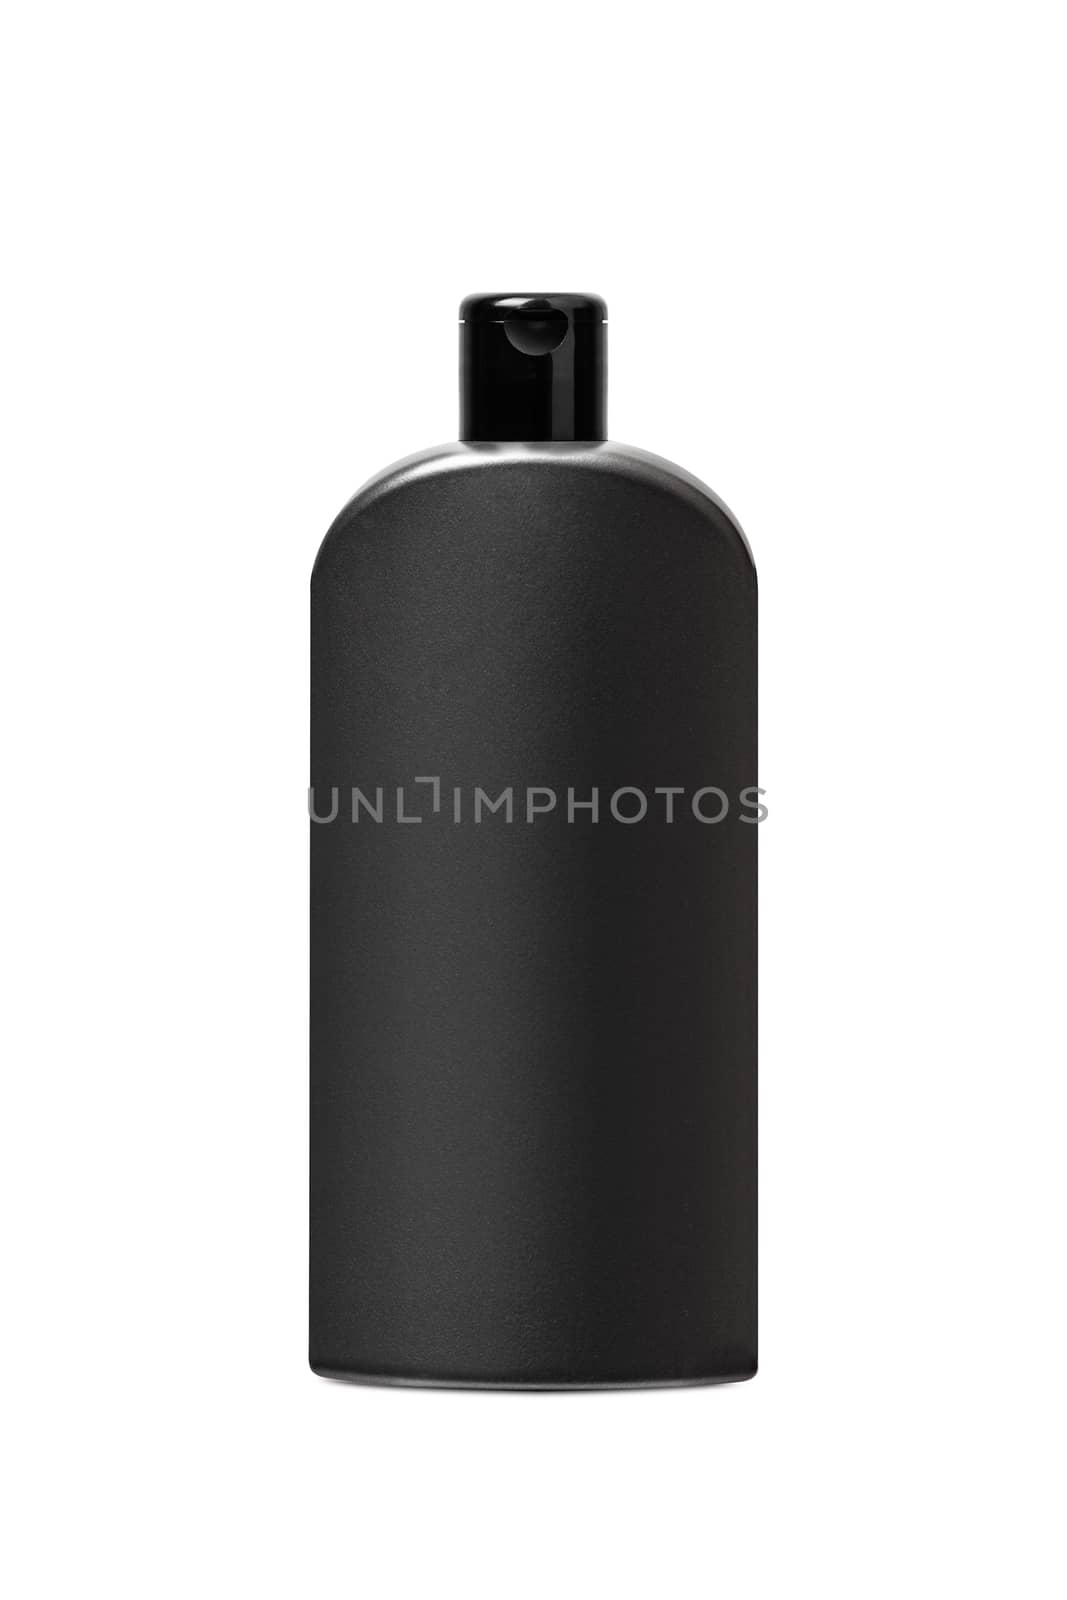 Black plastic bottle for shampoo or cosmetics, isolated on white by SlayCer